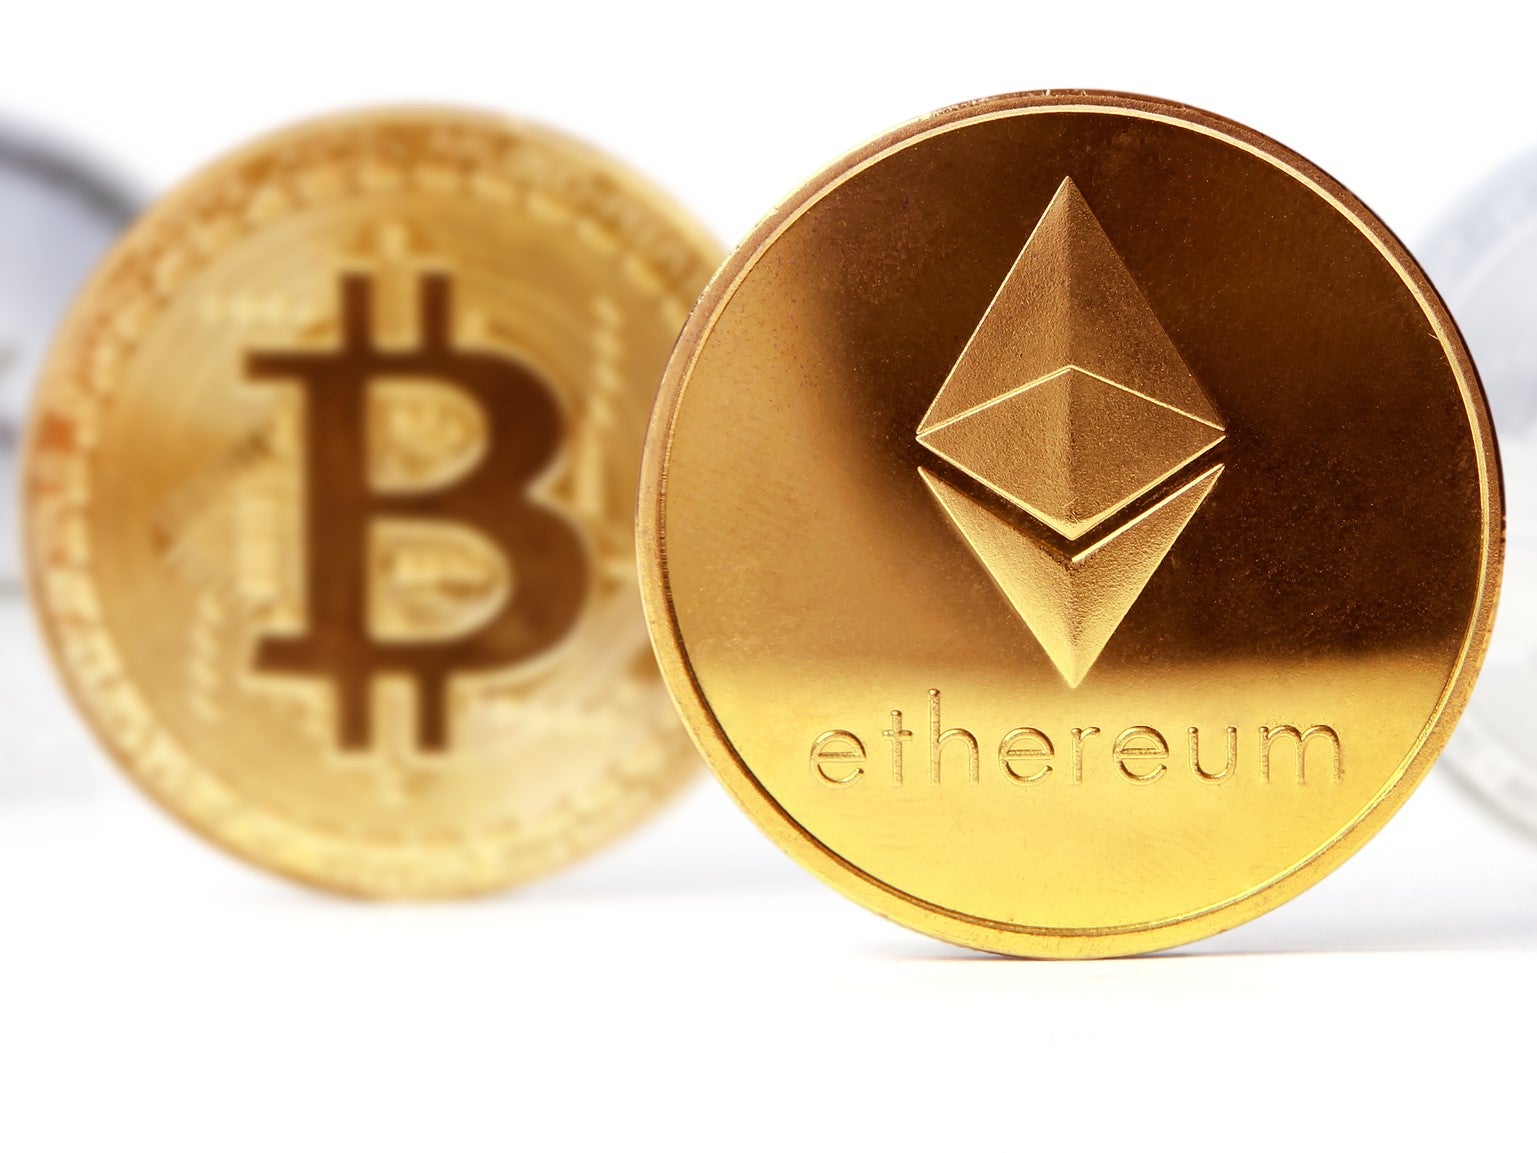 Ethereum rose in price by 360 per cent in the first four months of 2021, outpacing bitcoin’s gains